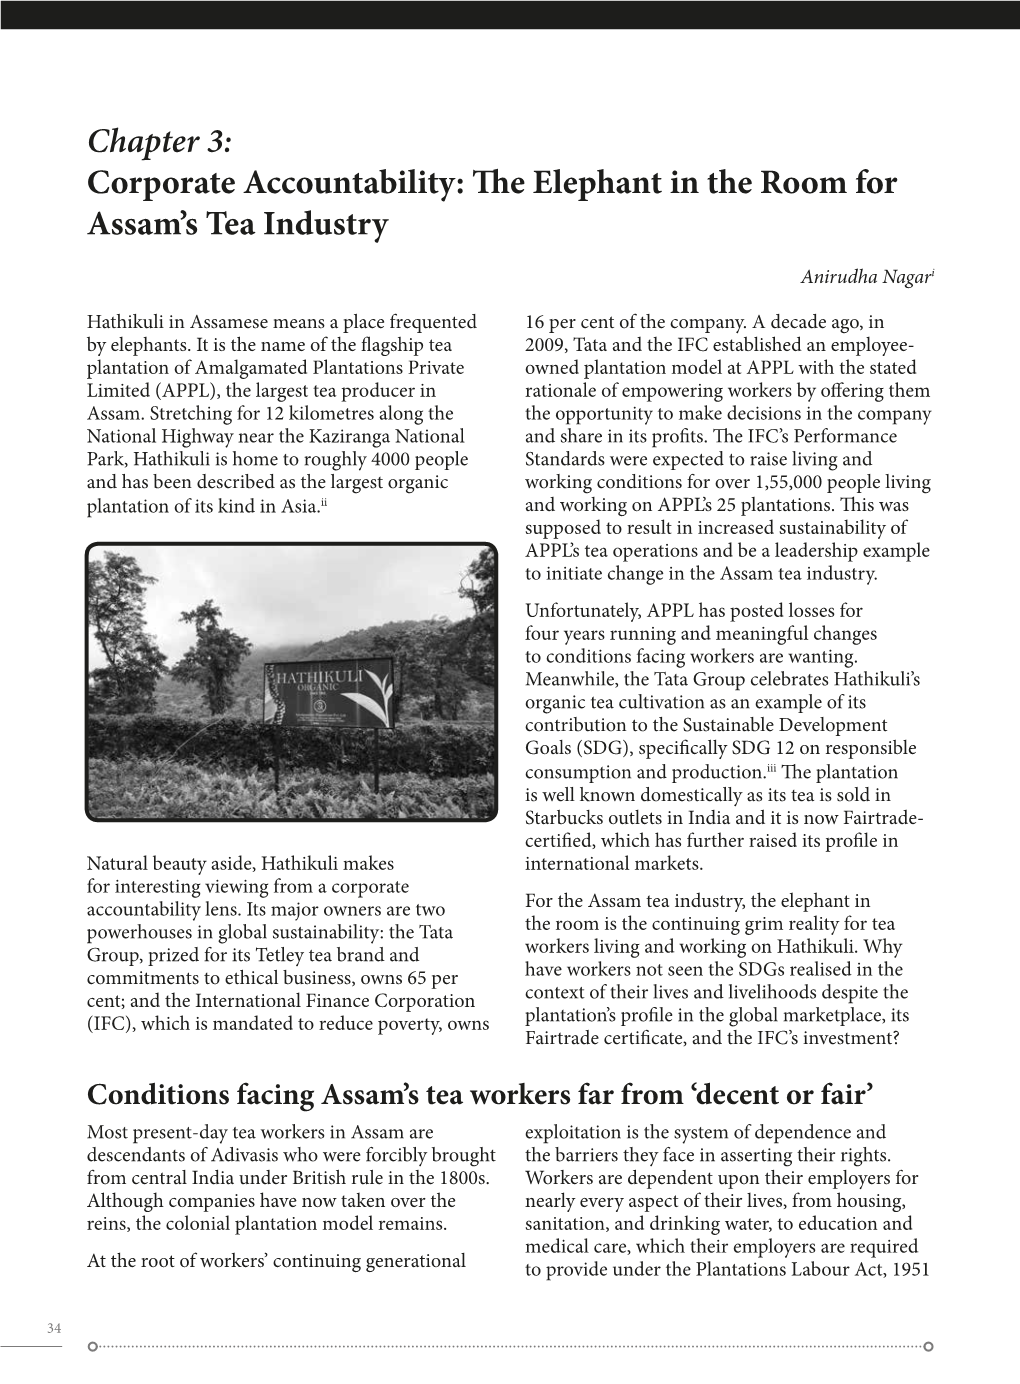 Corporate Accountability: the Elephant in the Room for Assam's